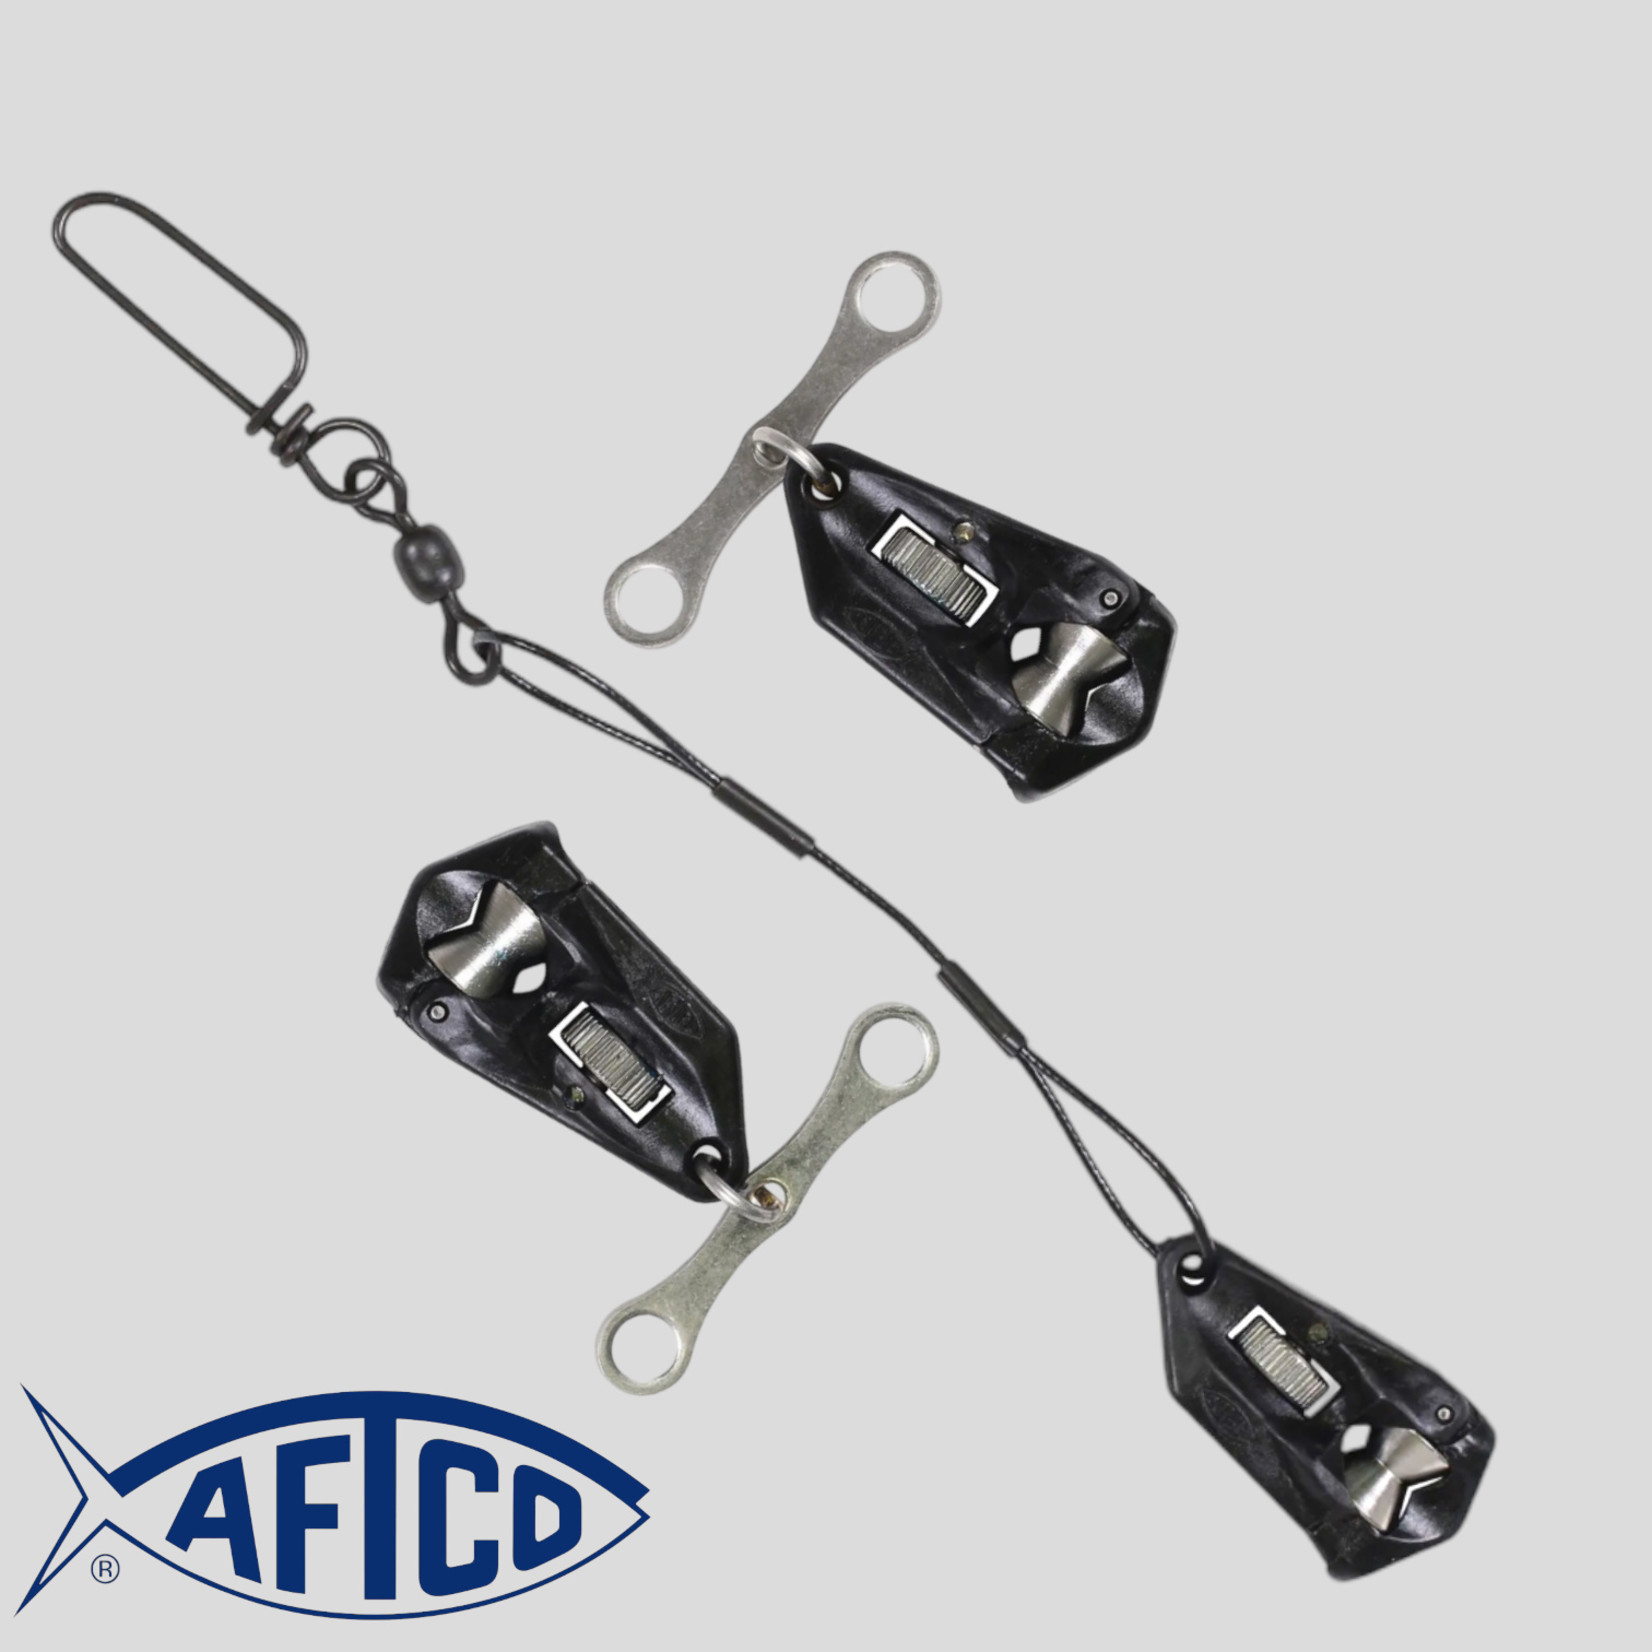 Aftco Aftco Roller Troller Release Clips